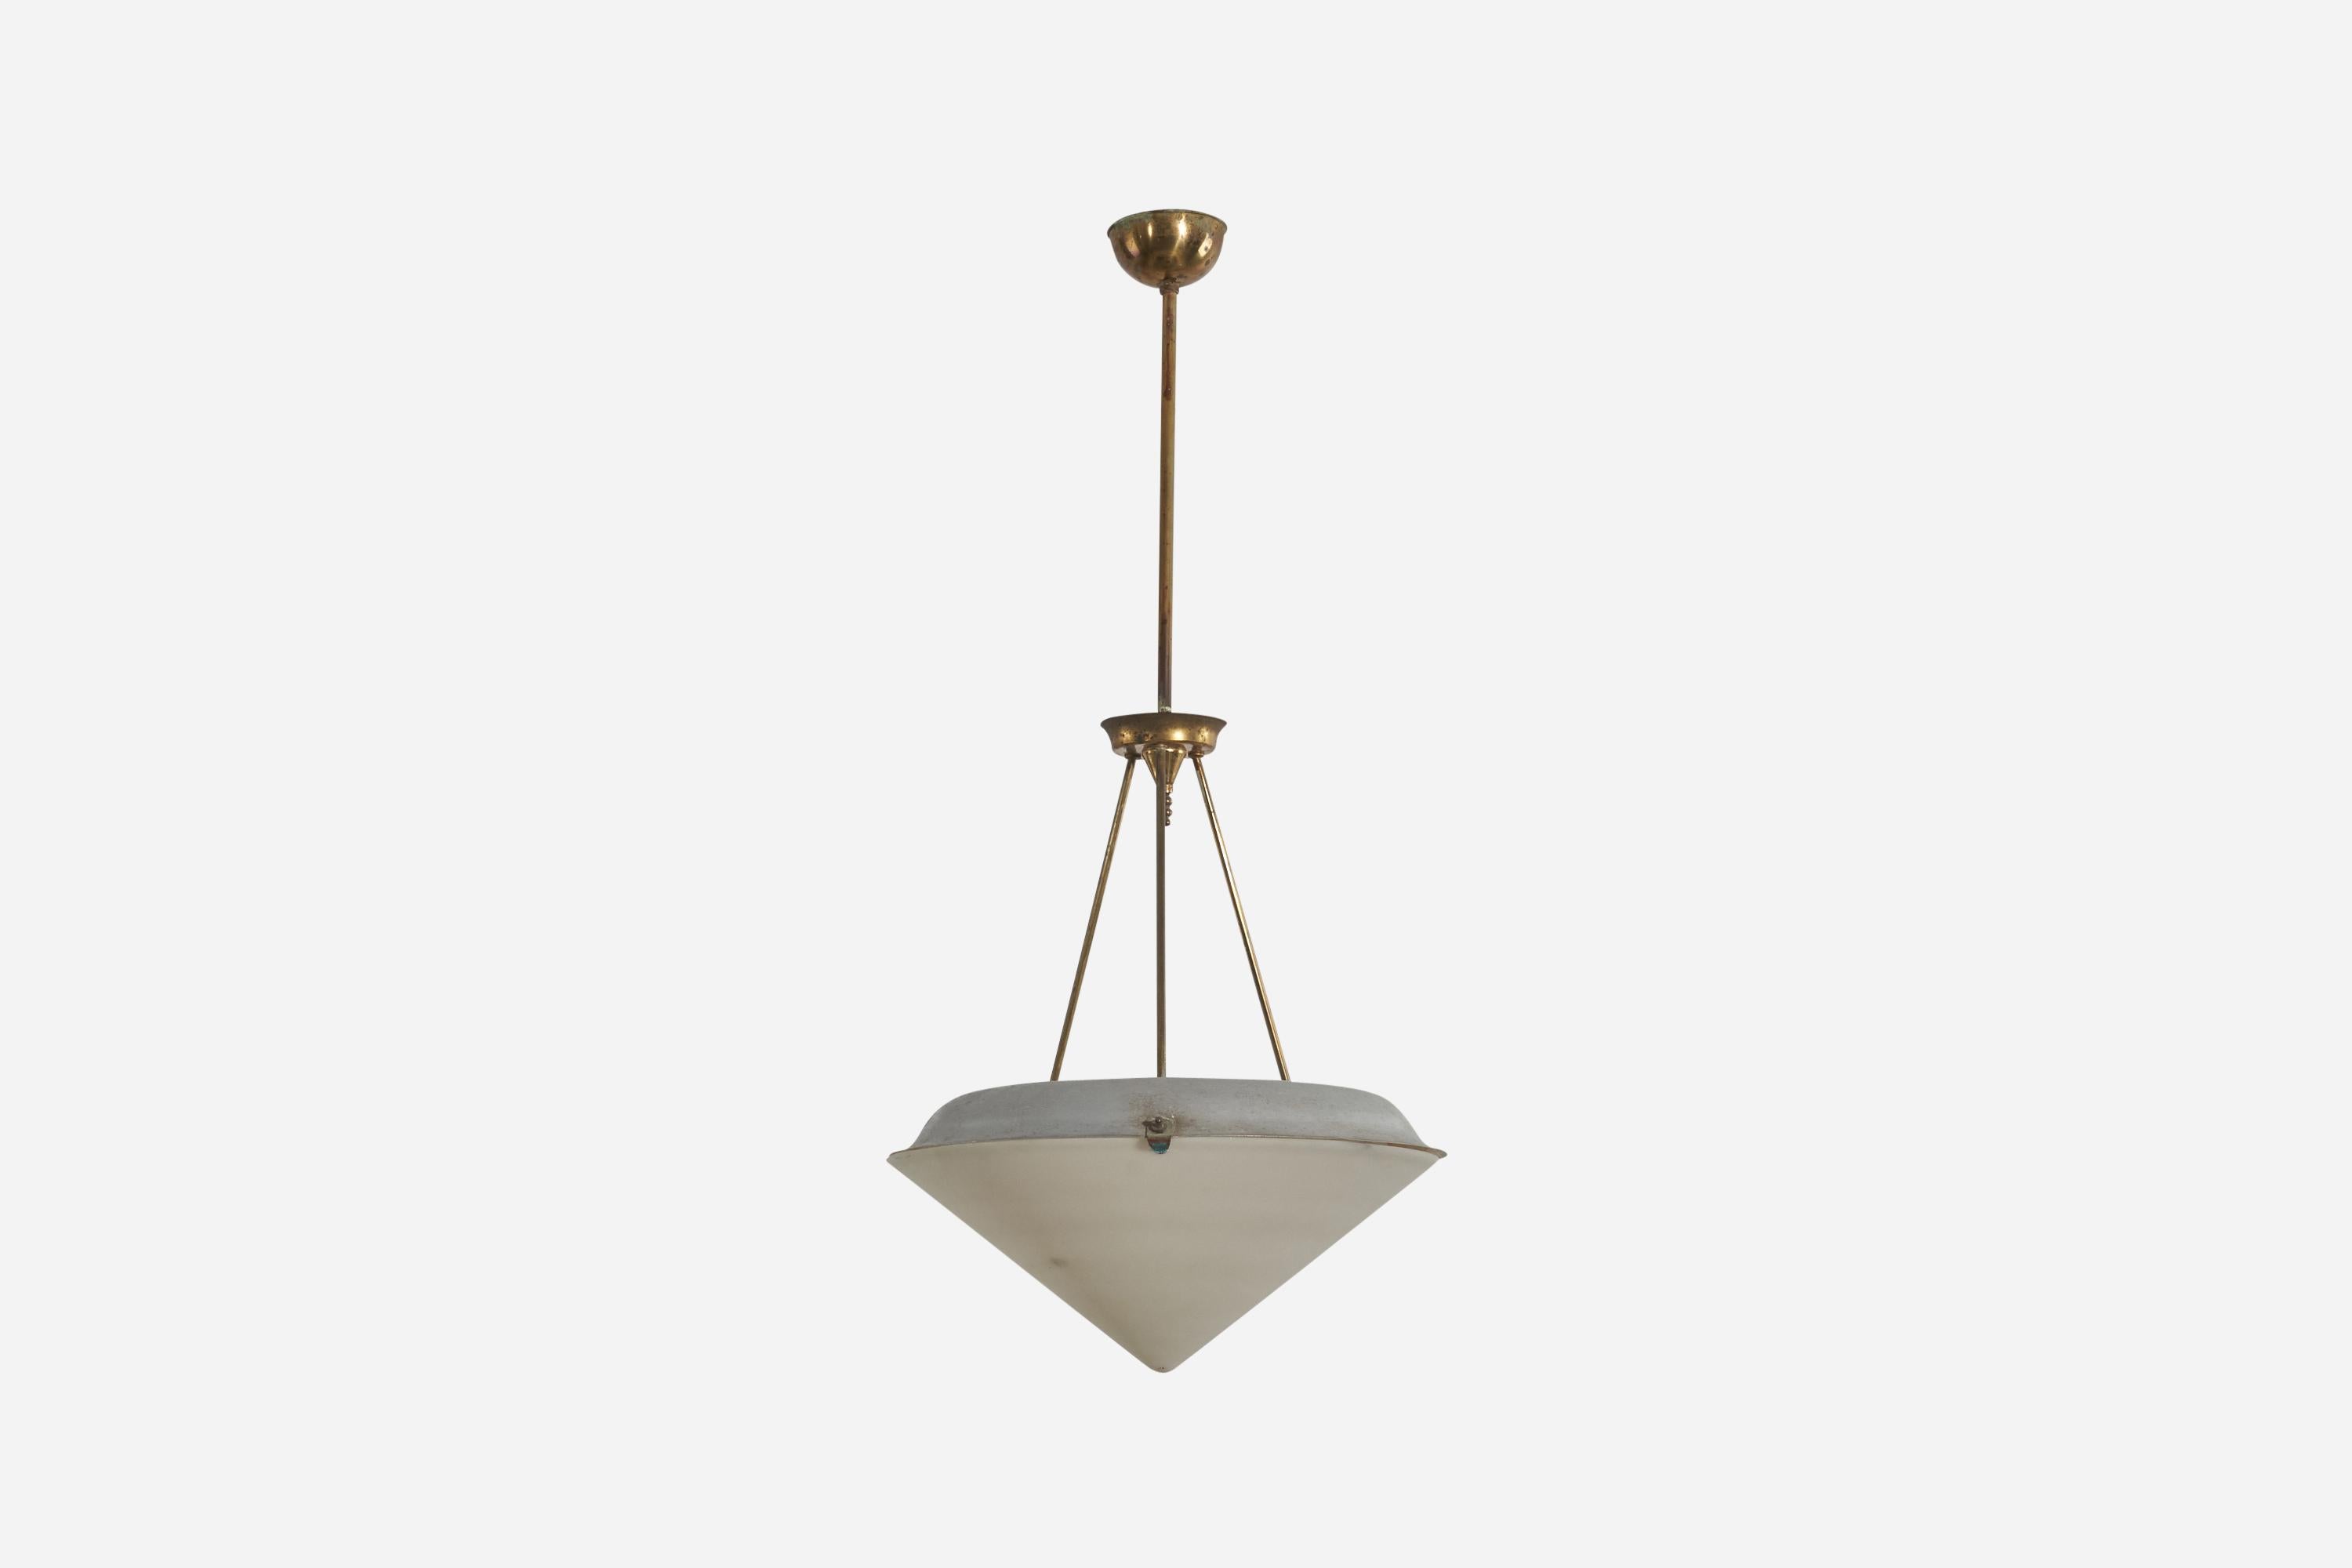 A pair of brass, galvanized steel and glass pendant lights designed and produced by an Italian designer, Italy, 1940s.

Dimensions of Canopy (inches): 1.86 x 4.10 x 4.10 (Height x Width x Depth).

Socket takes standard E-26 medium base